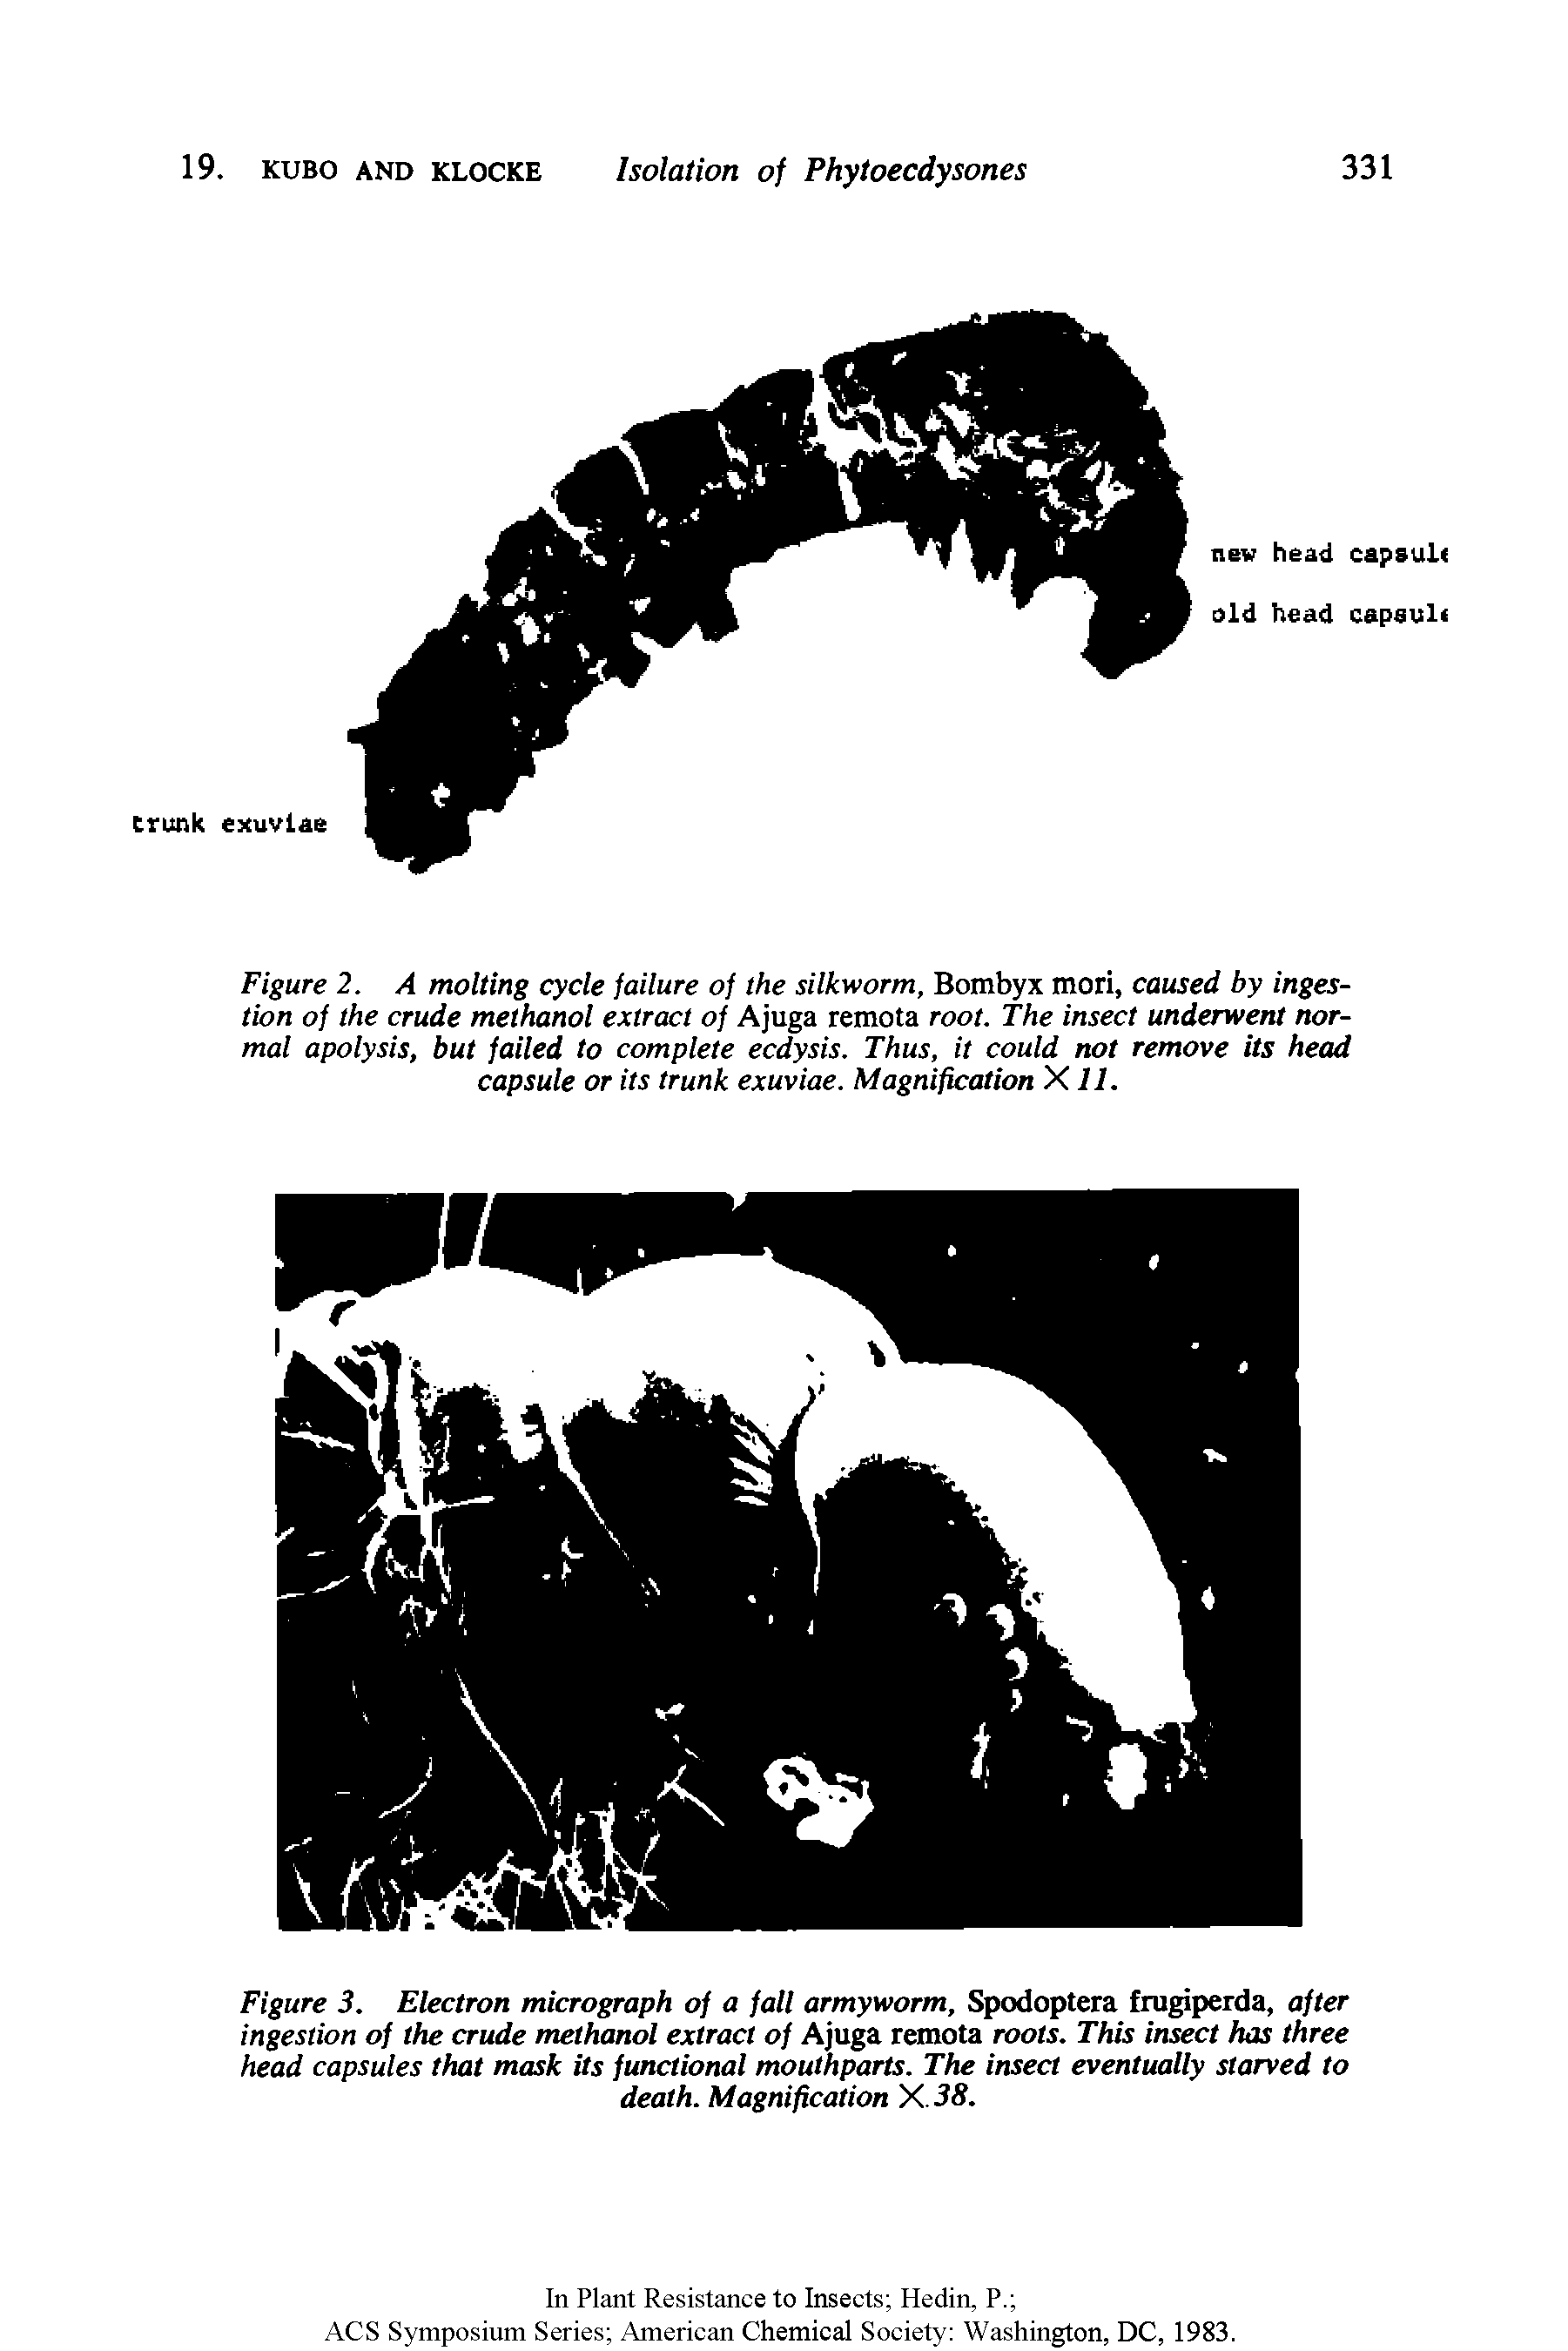 Figure 3. Electron micrograph of a fall armyworm, Spcxloptera frugiperda, after ingestion of the crude methanol extract of Ajuga remota roots. This insect has three head capsules that mask its functional mouthparts. The insect eventually starved to death. Magnification X.38.